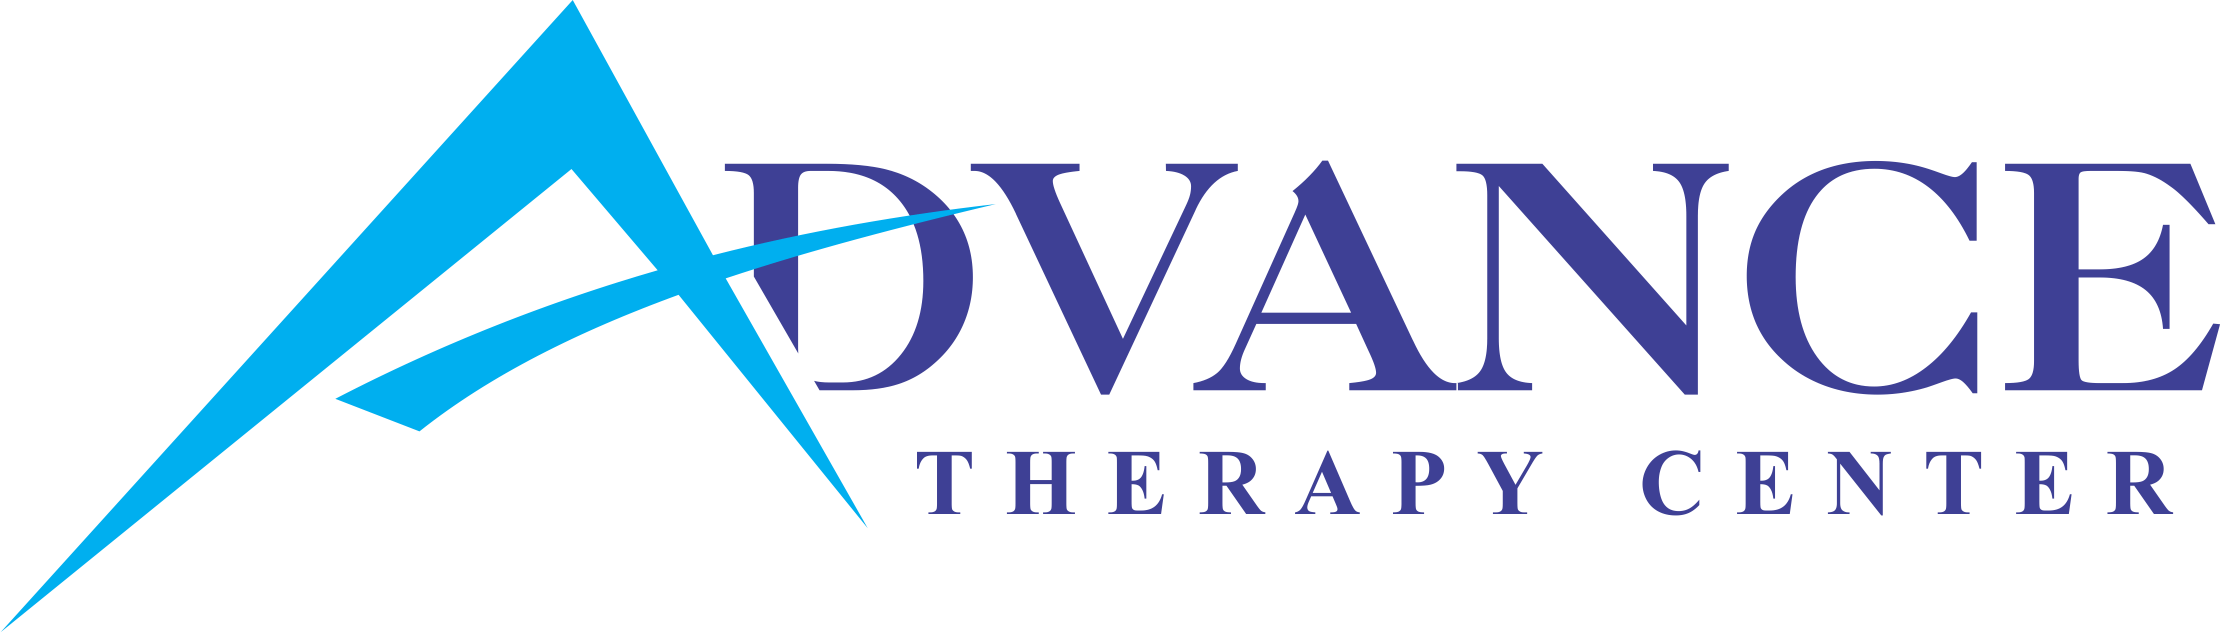 Advance Therapy Center